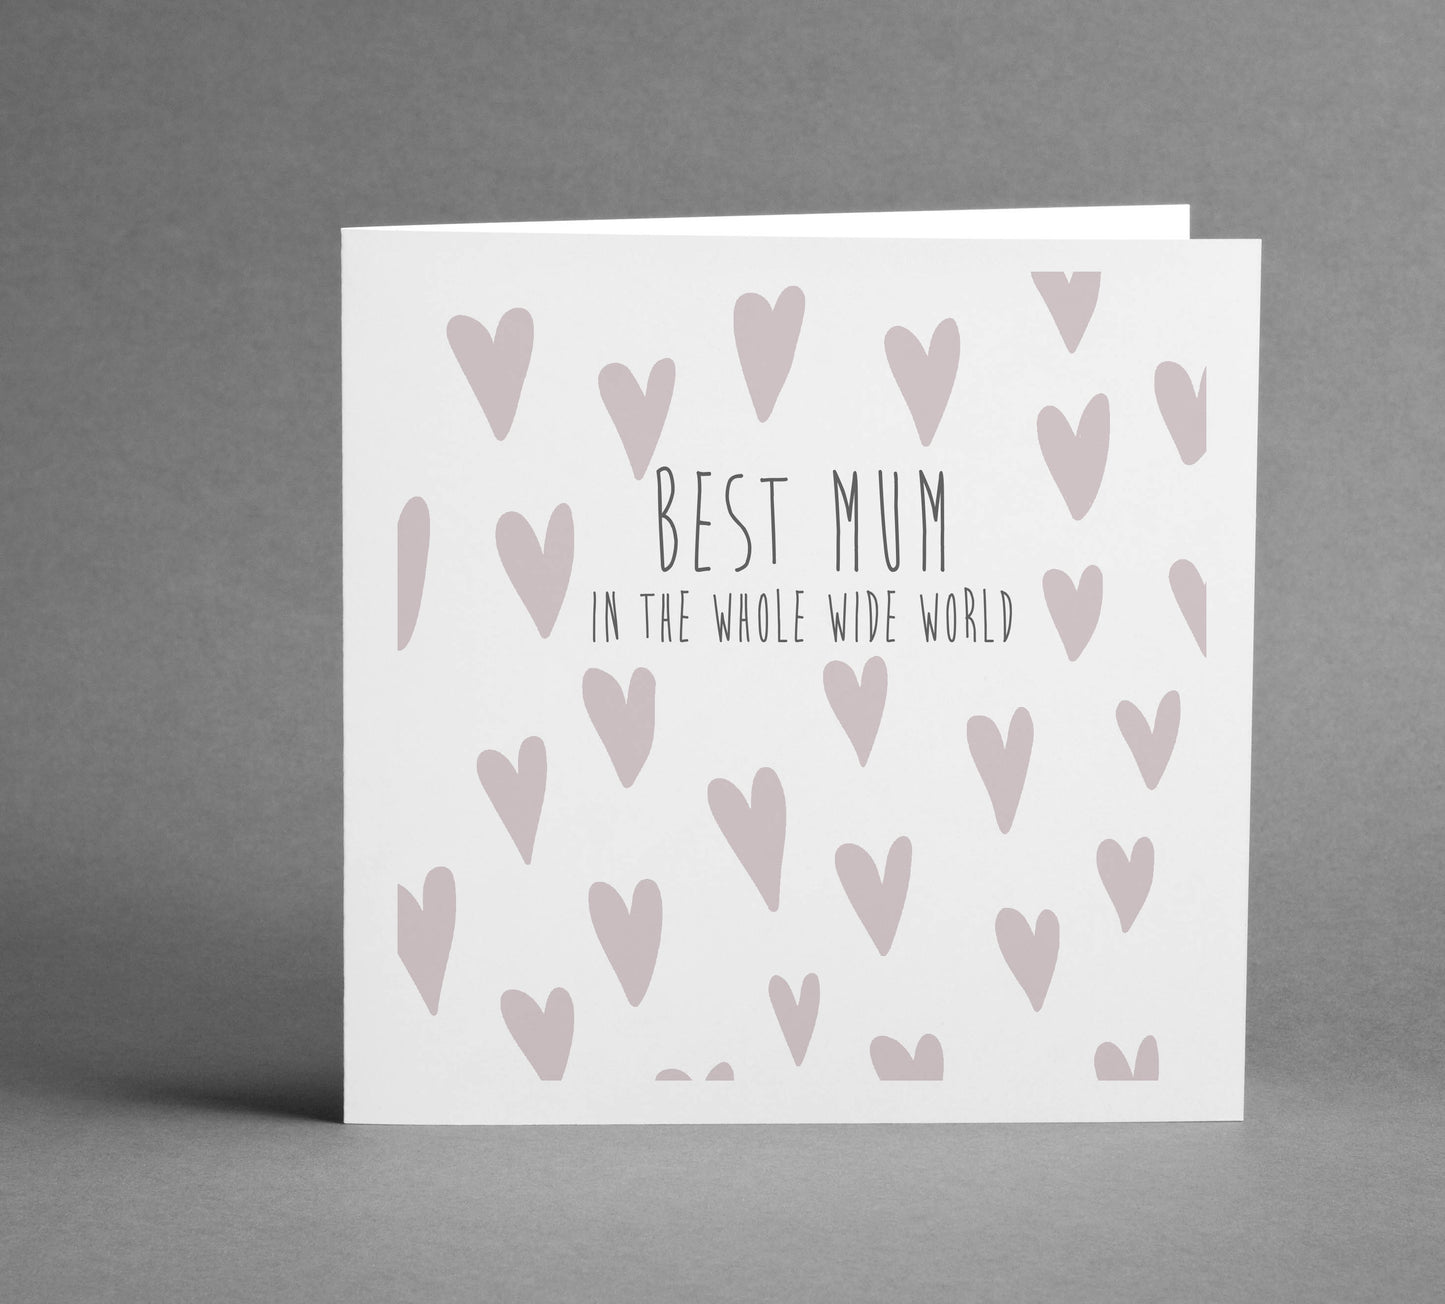 Best Mum in the whole wide world hearts square card